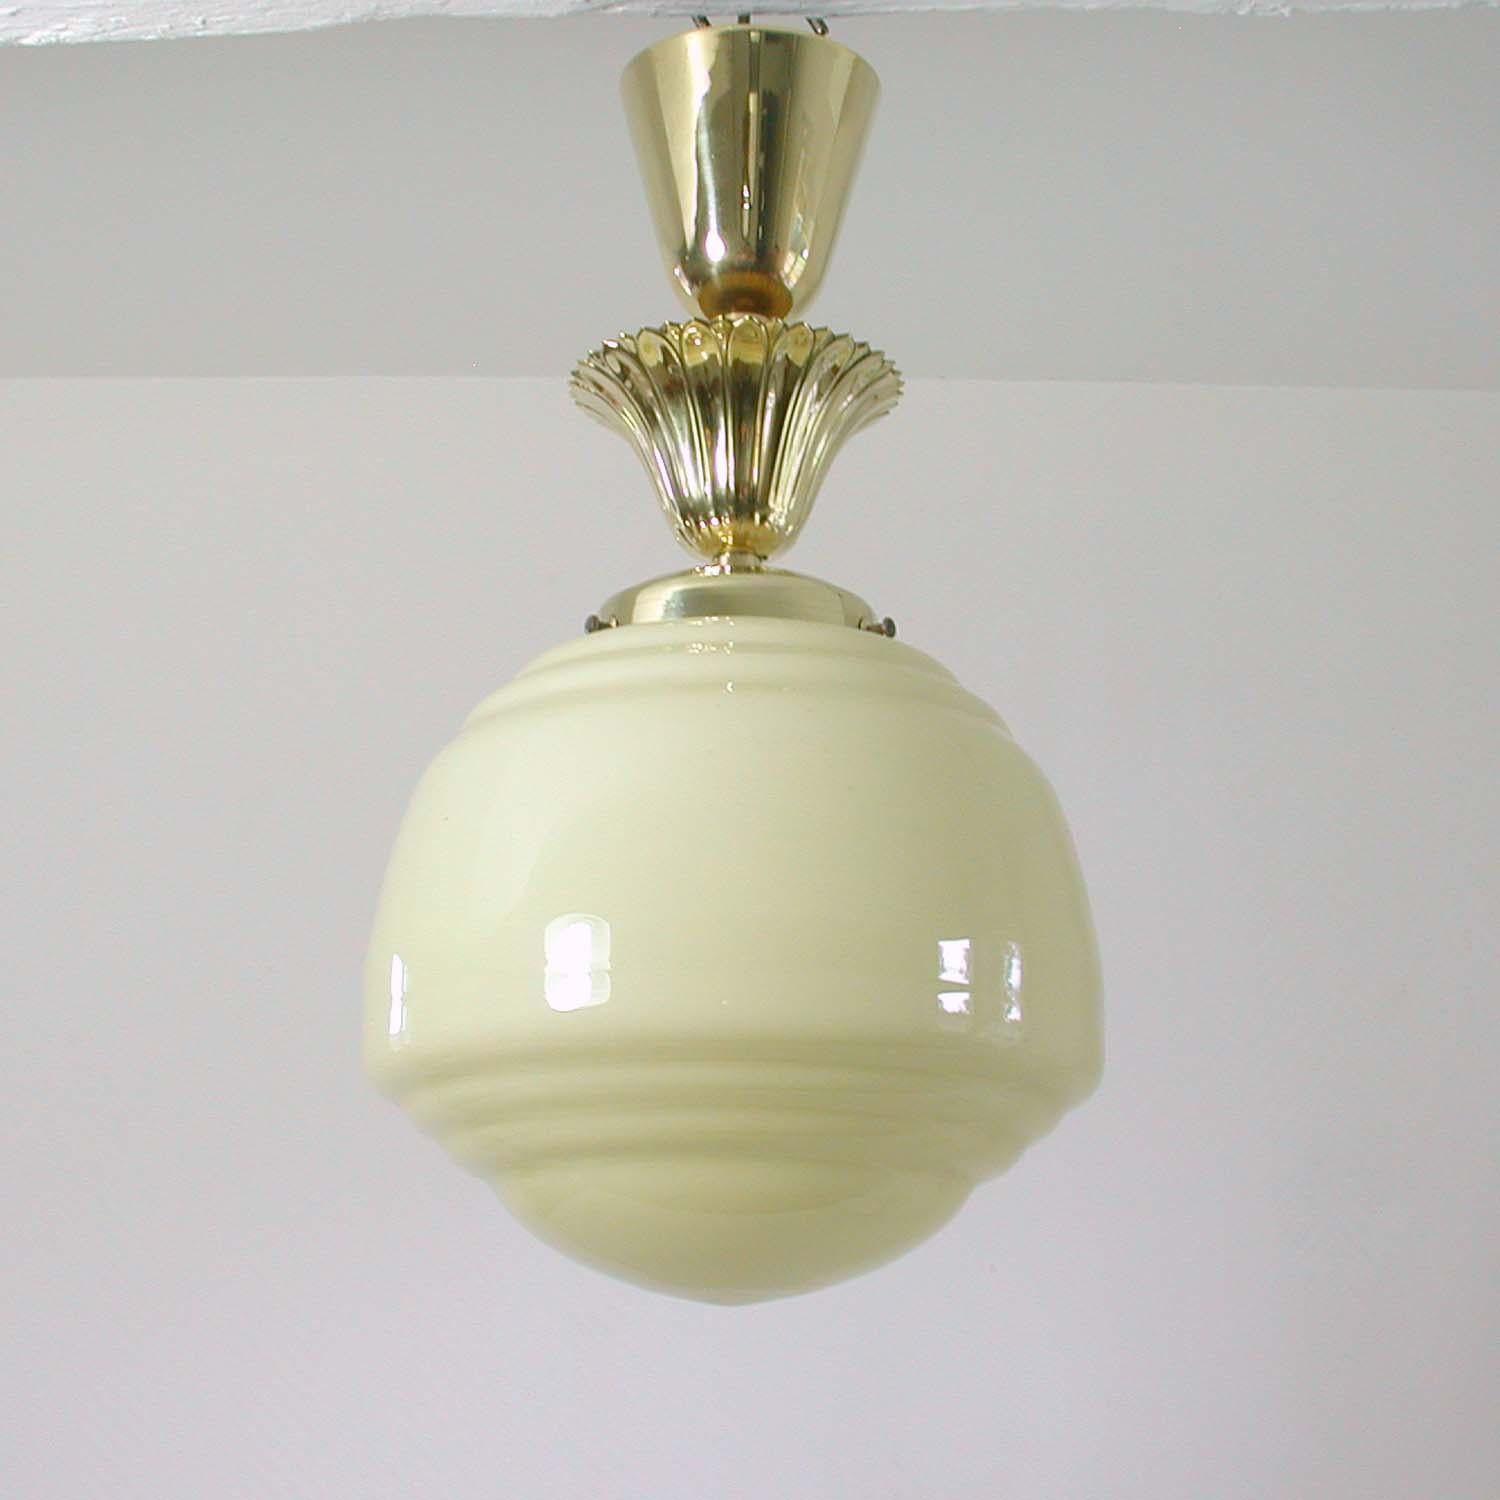 This late Art Deco ceiling light was designed and manufactured in Austria in the early 1940s. It has got an ivory colored opaline glass shade and brass details. All brass parts have been polished and the lamp has been rewired.